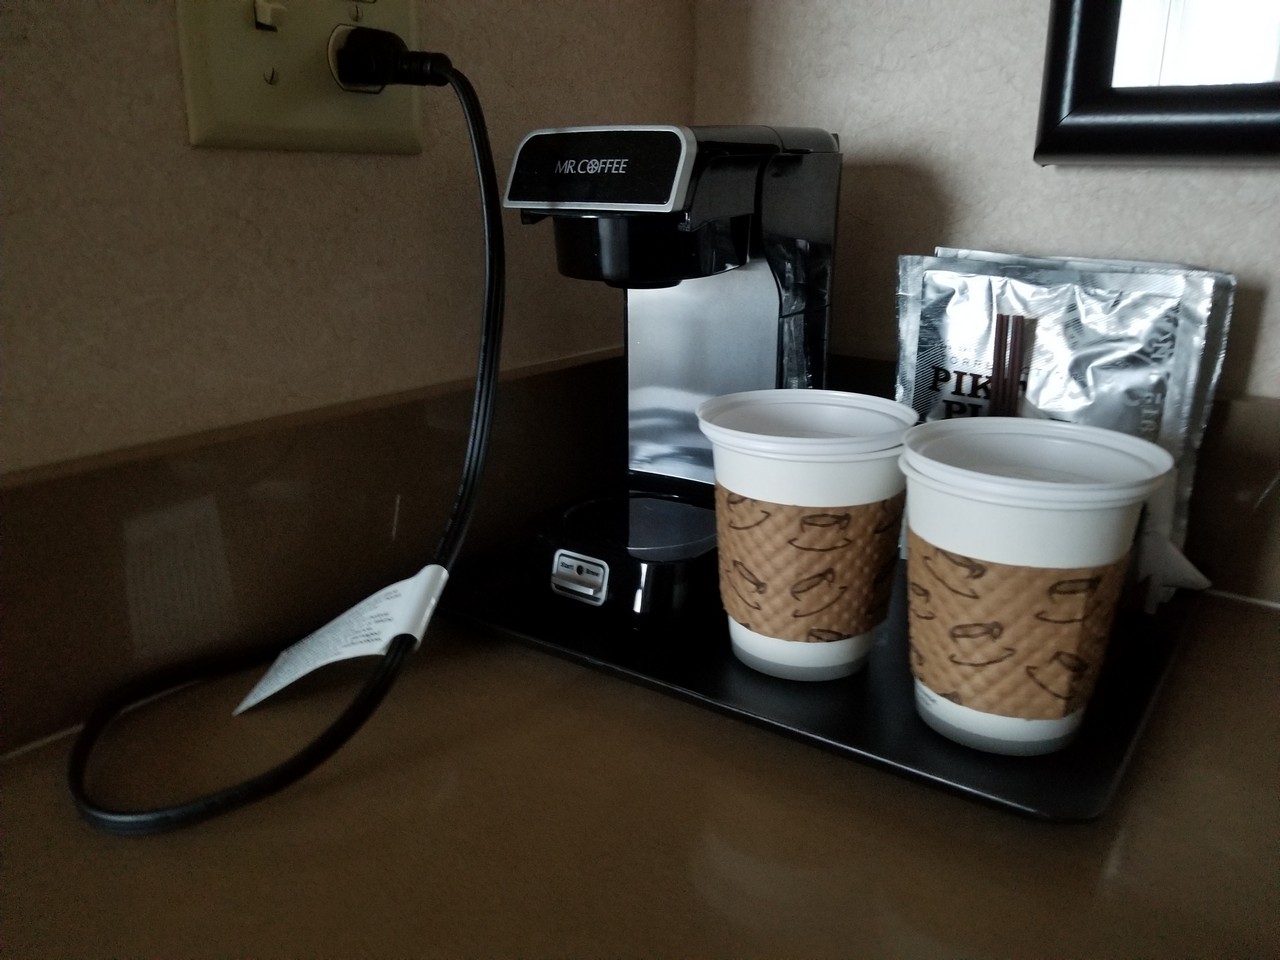 a coffee maker with two cups on a tray